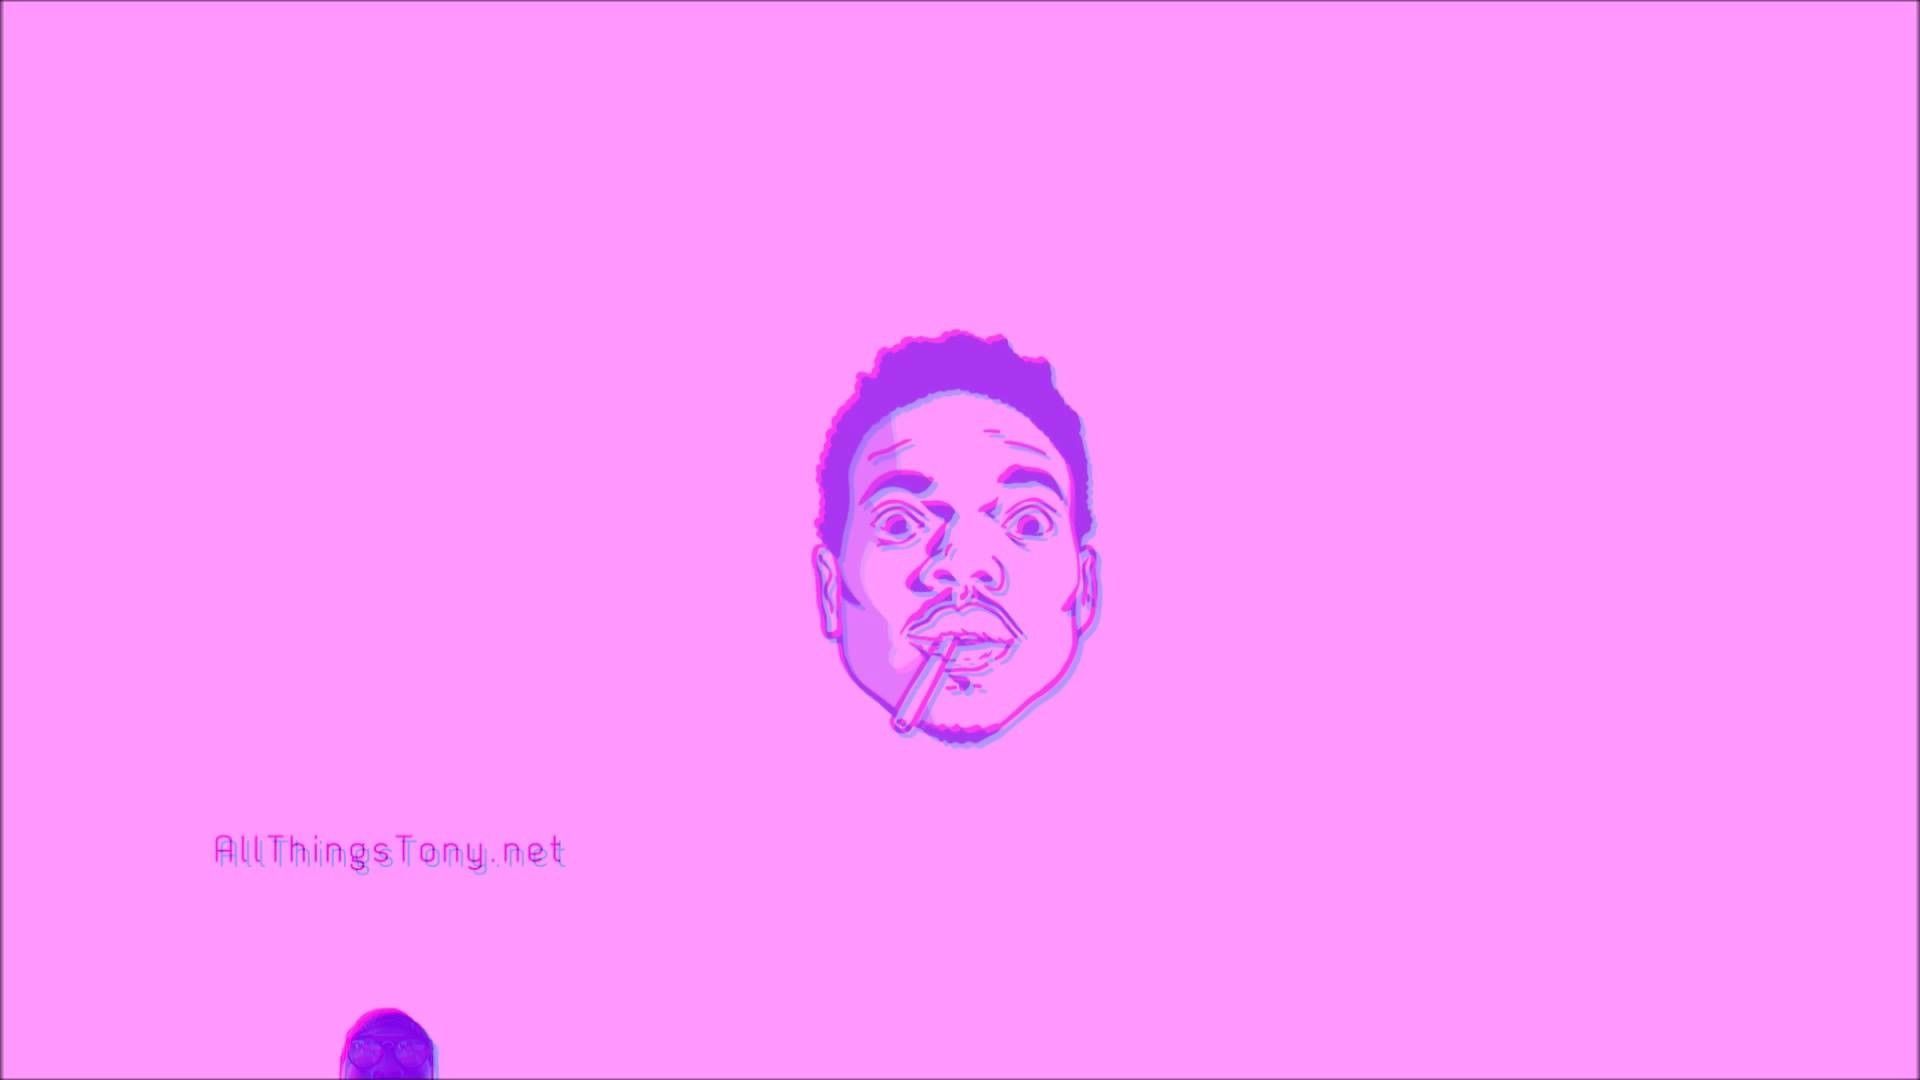 A person with their mouth open on pink background - Chance the Rapper